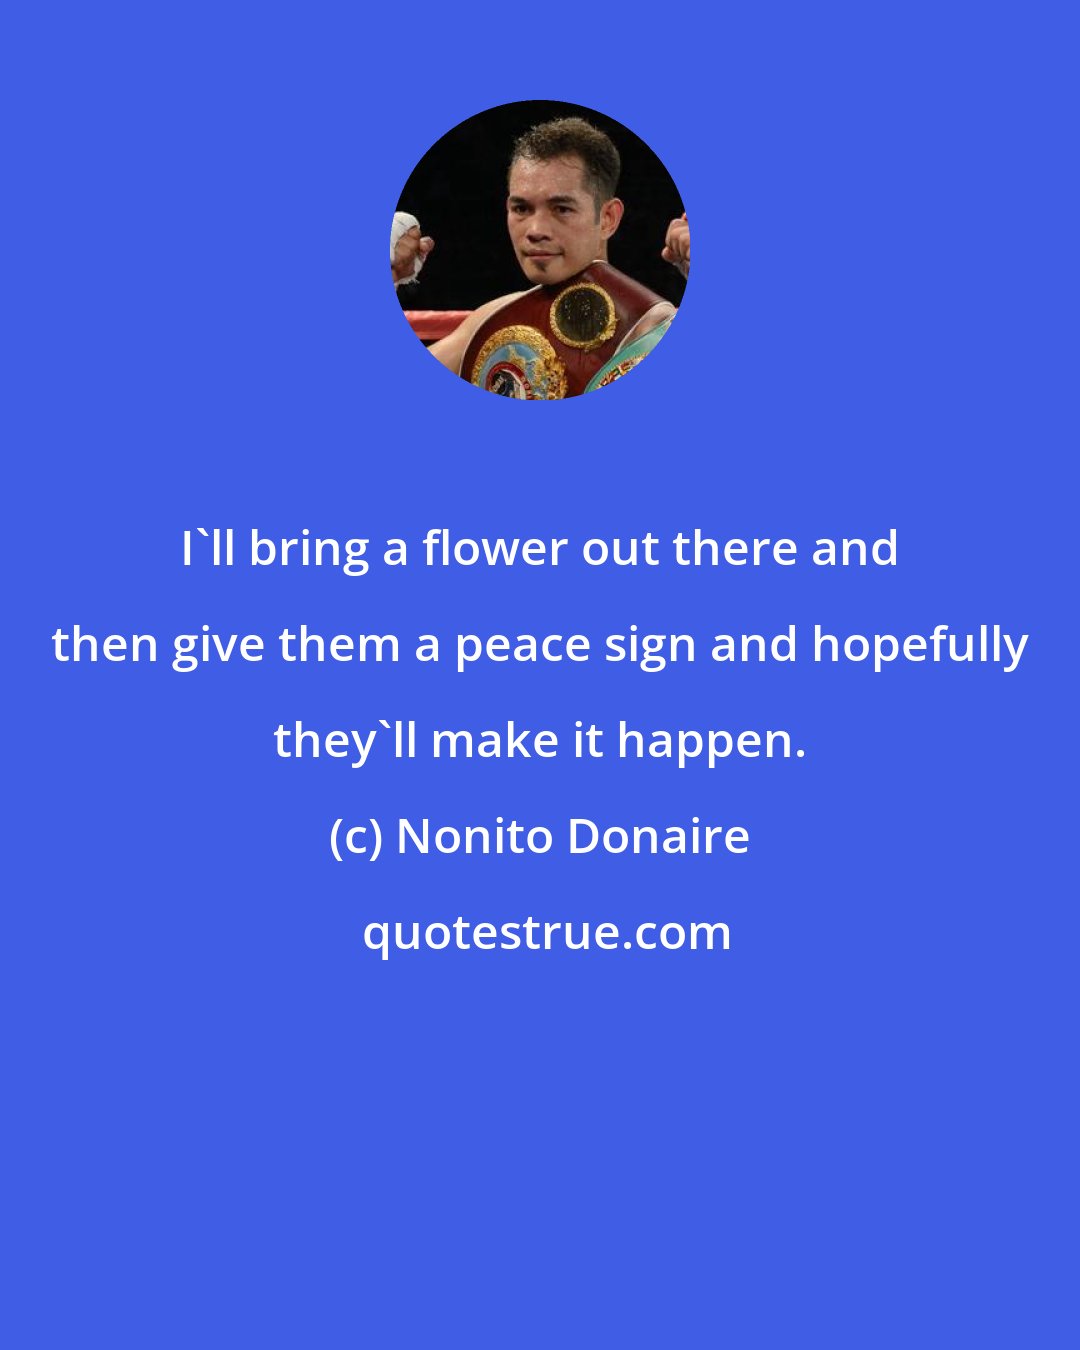 Nonito Donaire: I'll bring a flower out there and then give them a peace sign and hopefully they'll make it happen.